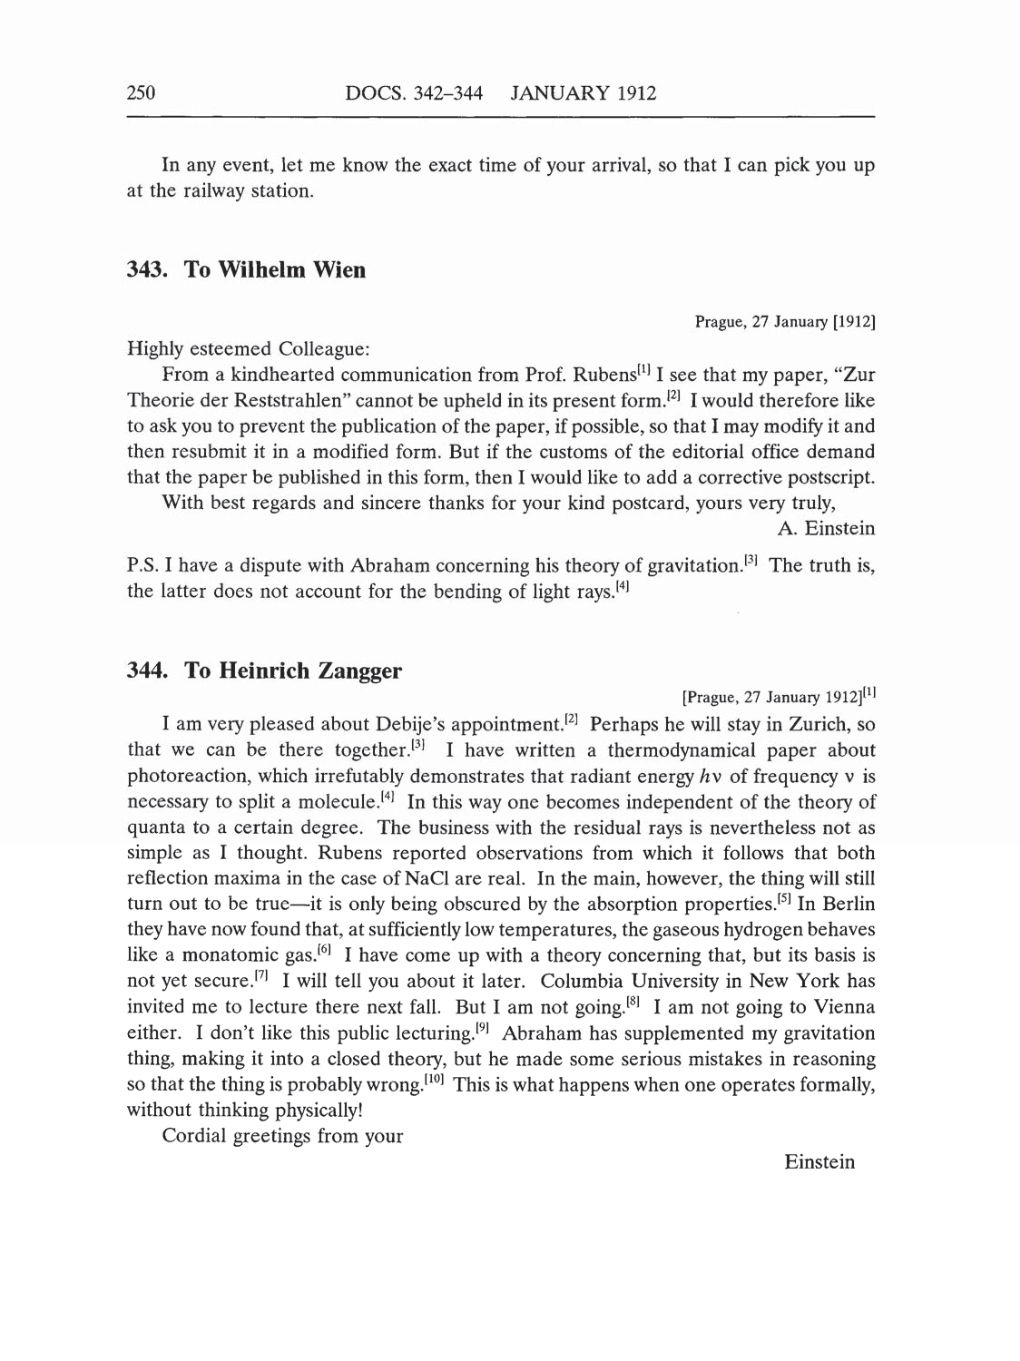 Volume 5: The Swiss Years: Correspondence, 1902-1914 (English translation supplement) page 250